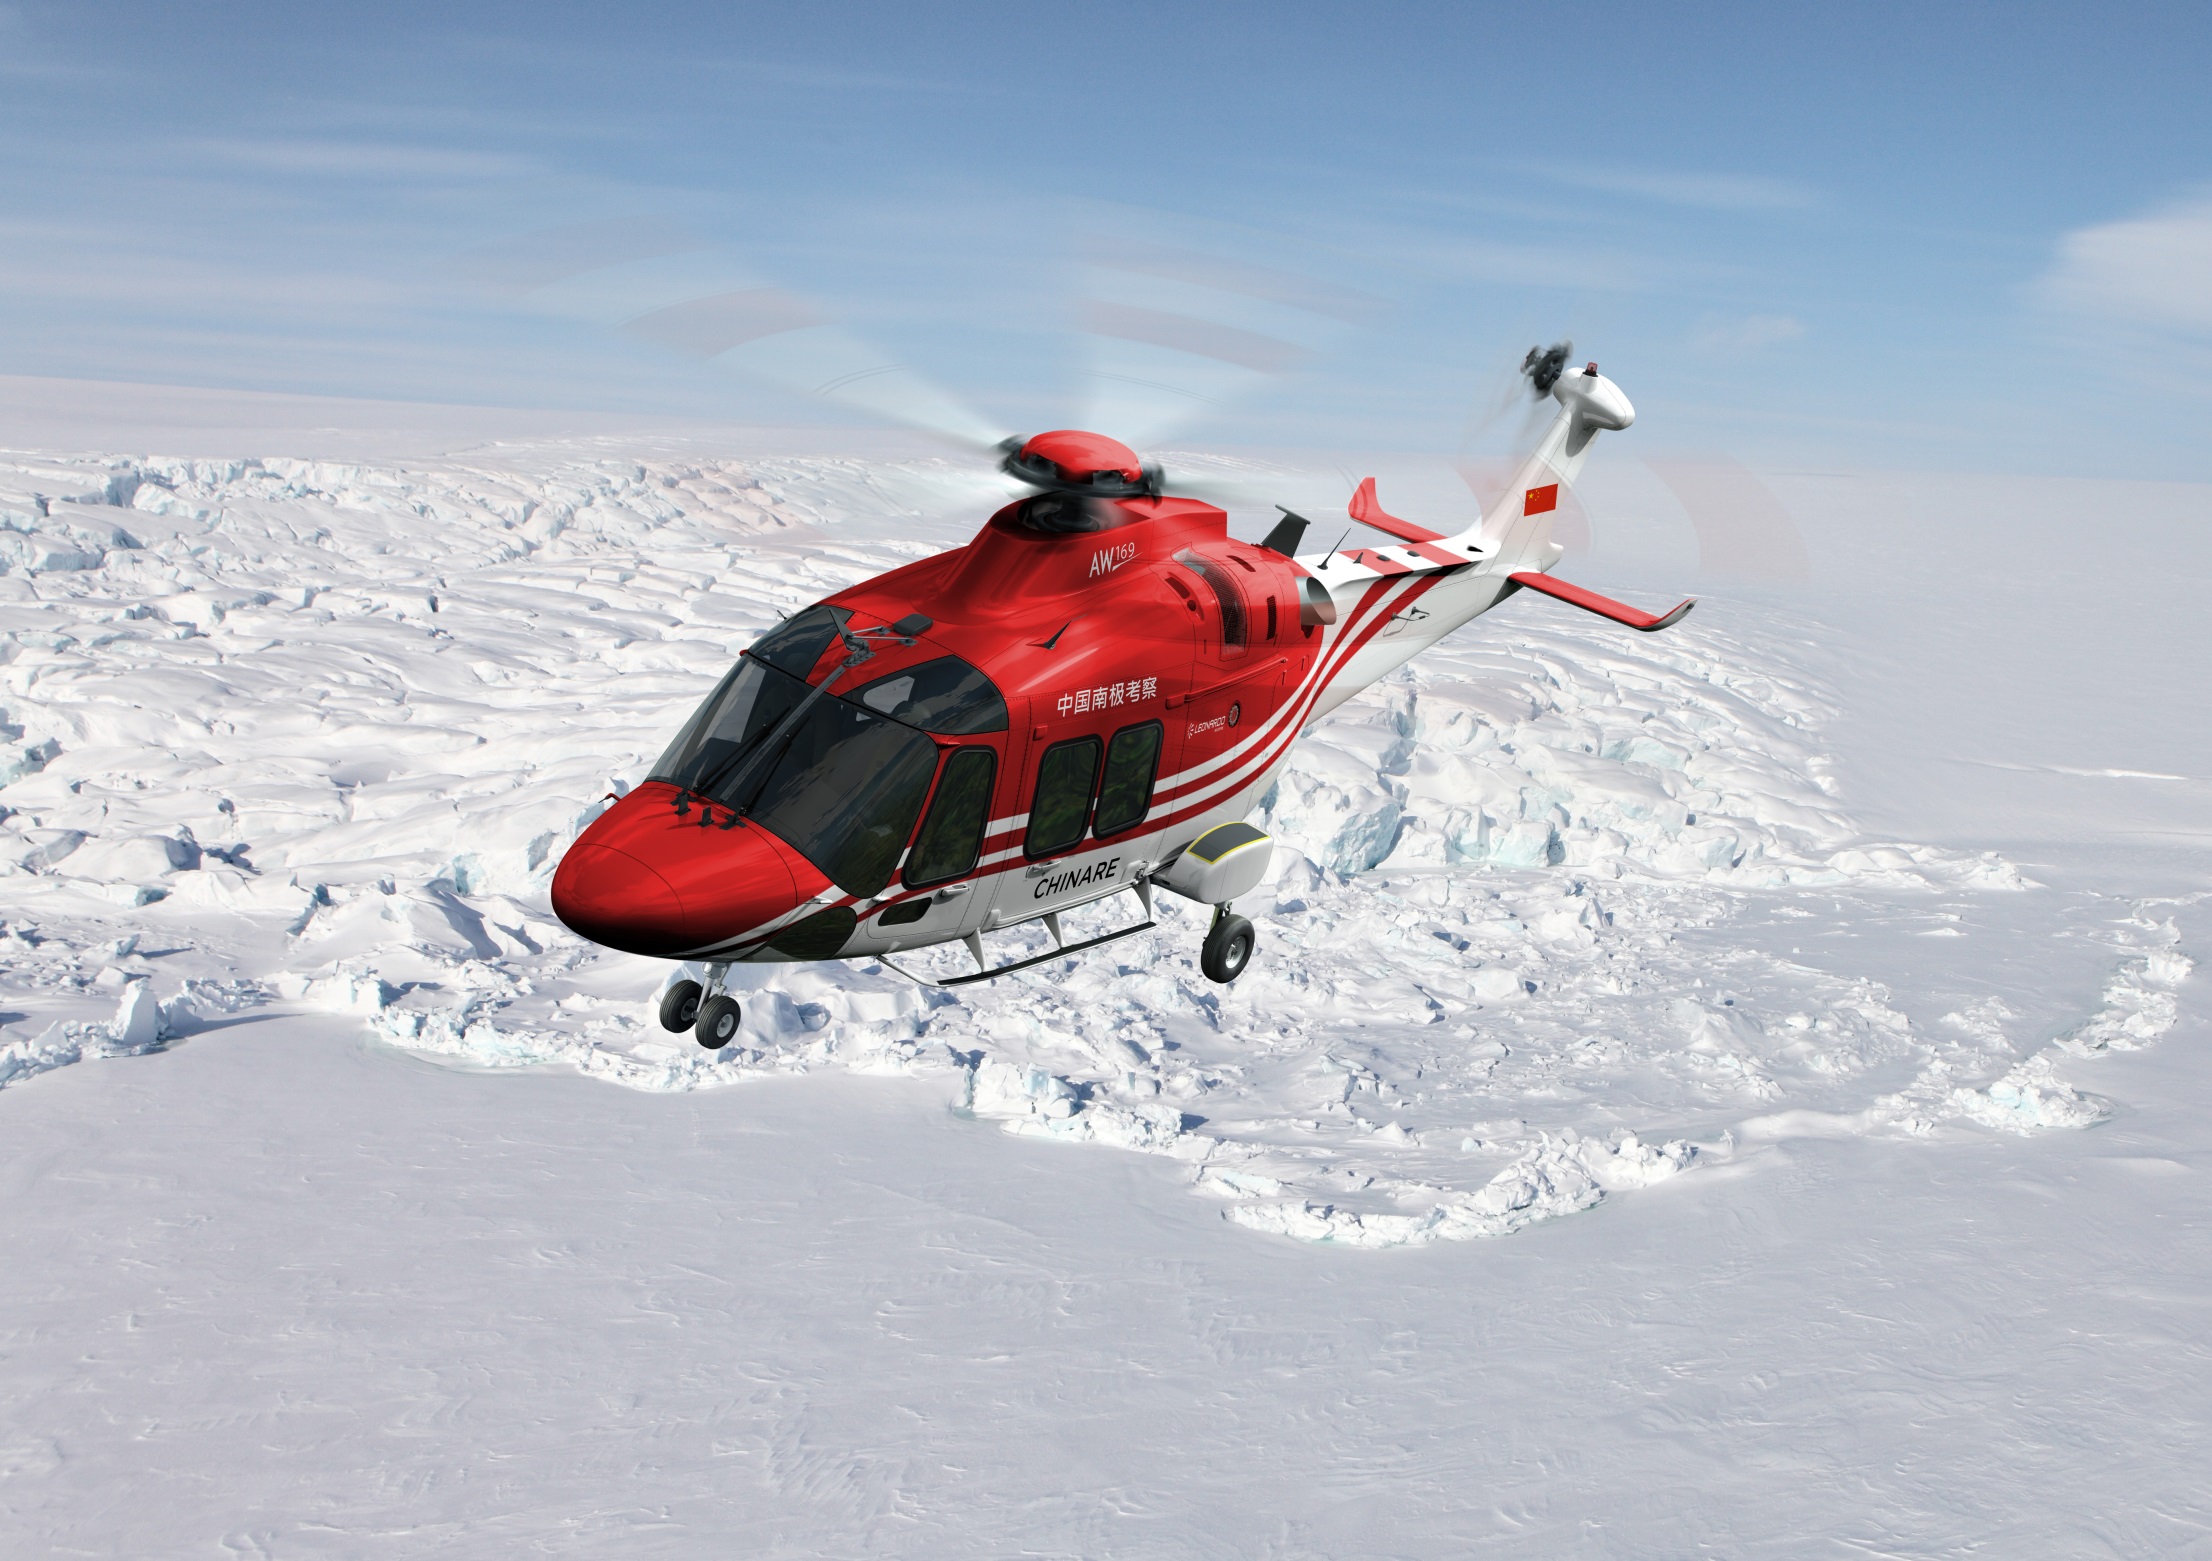 The AgustaWestland AW169 light intermediate helicopter will perform a range of roles including passenger transport, iceberg sighting, and cargo sling operations.